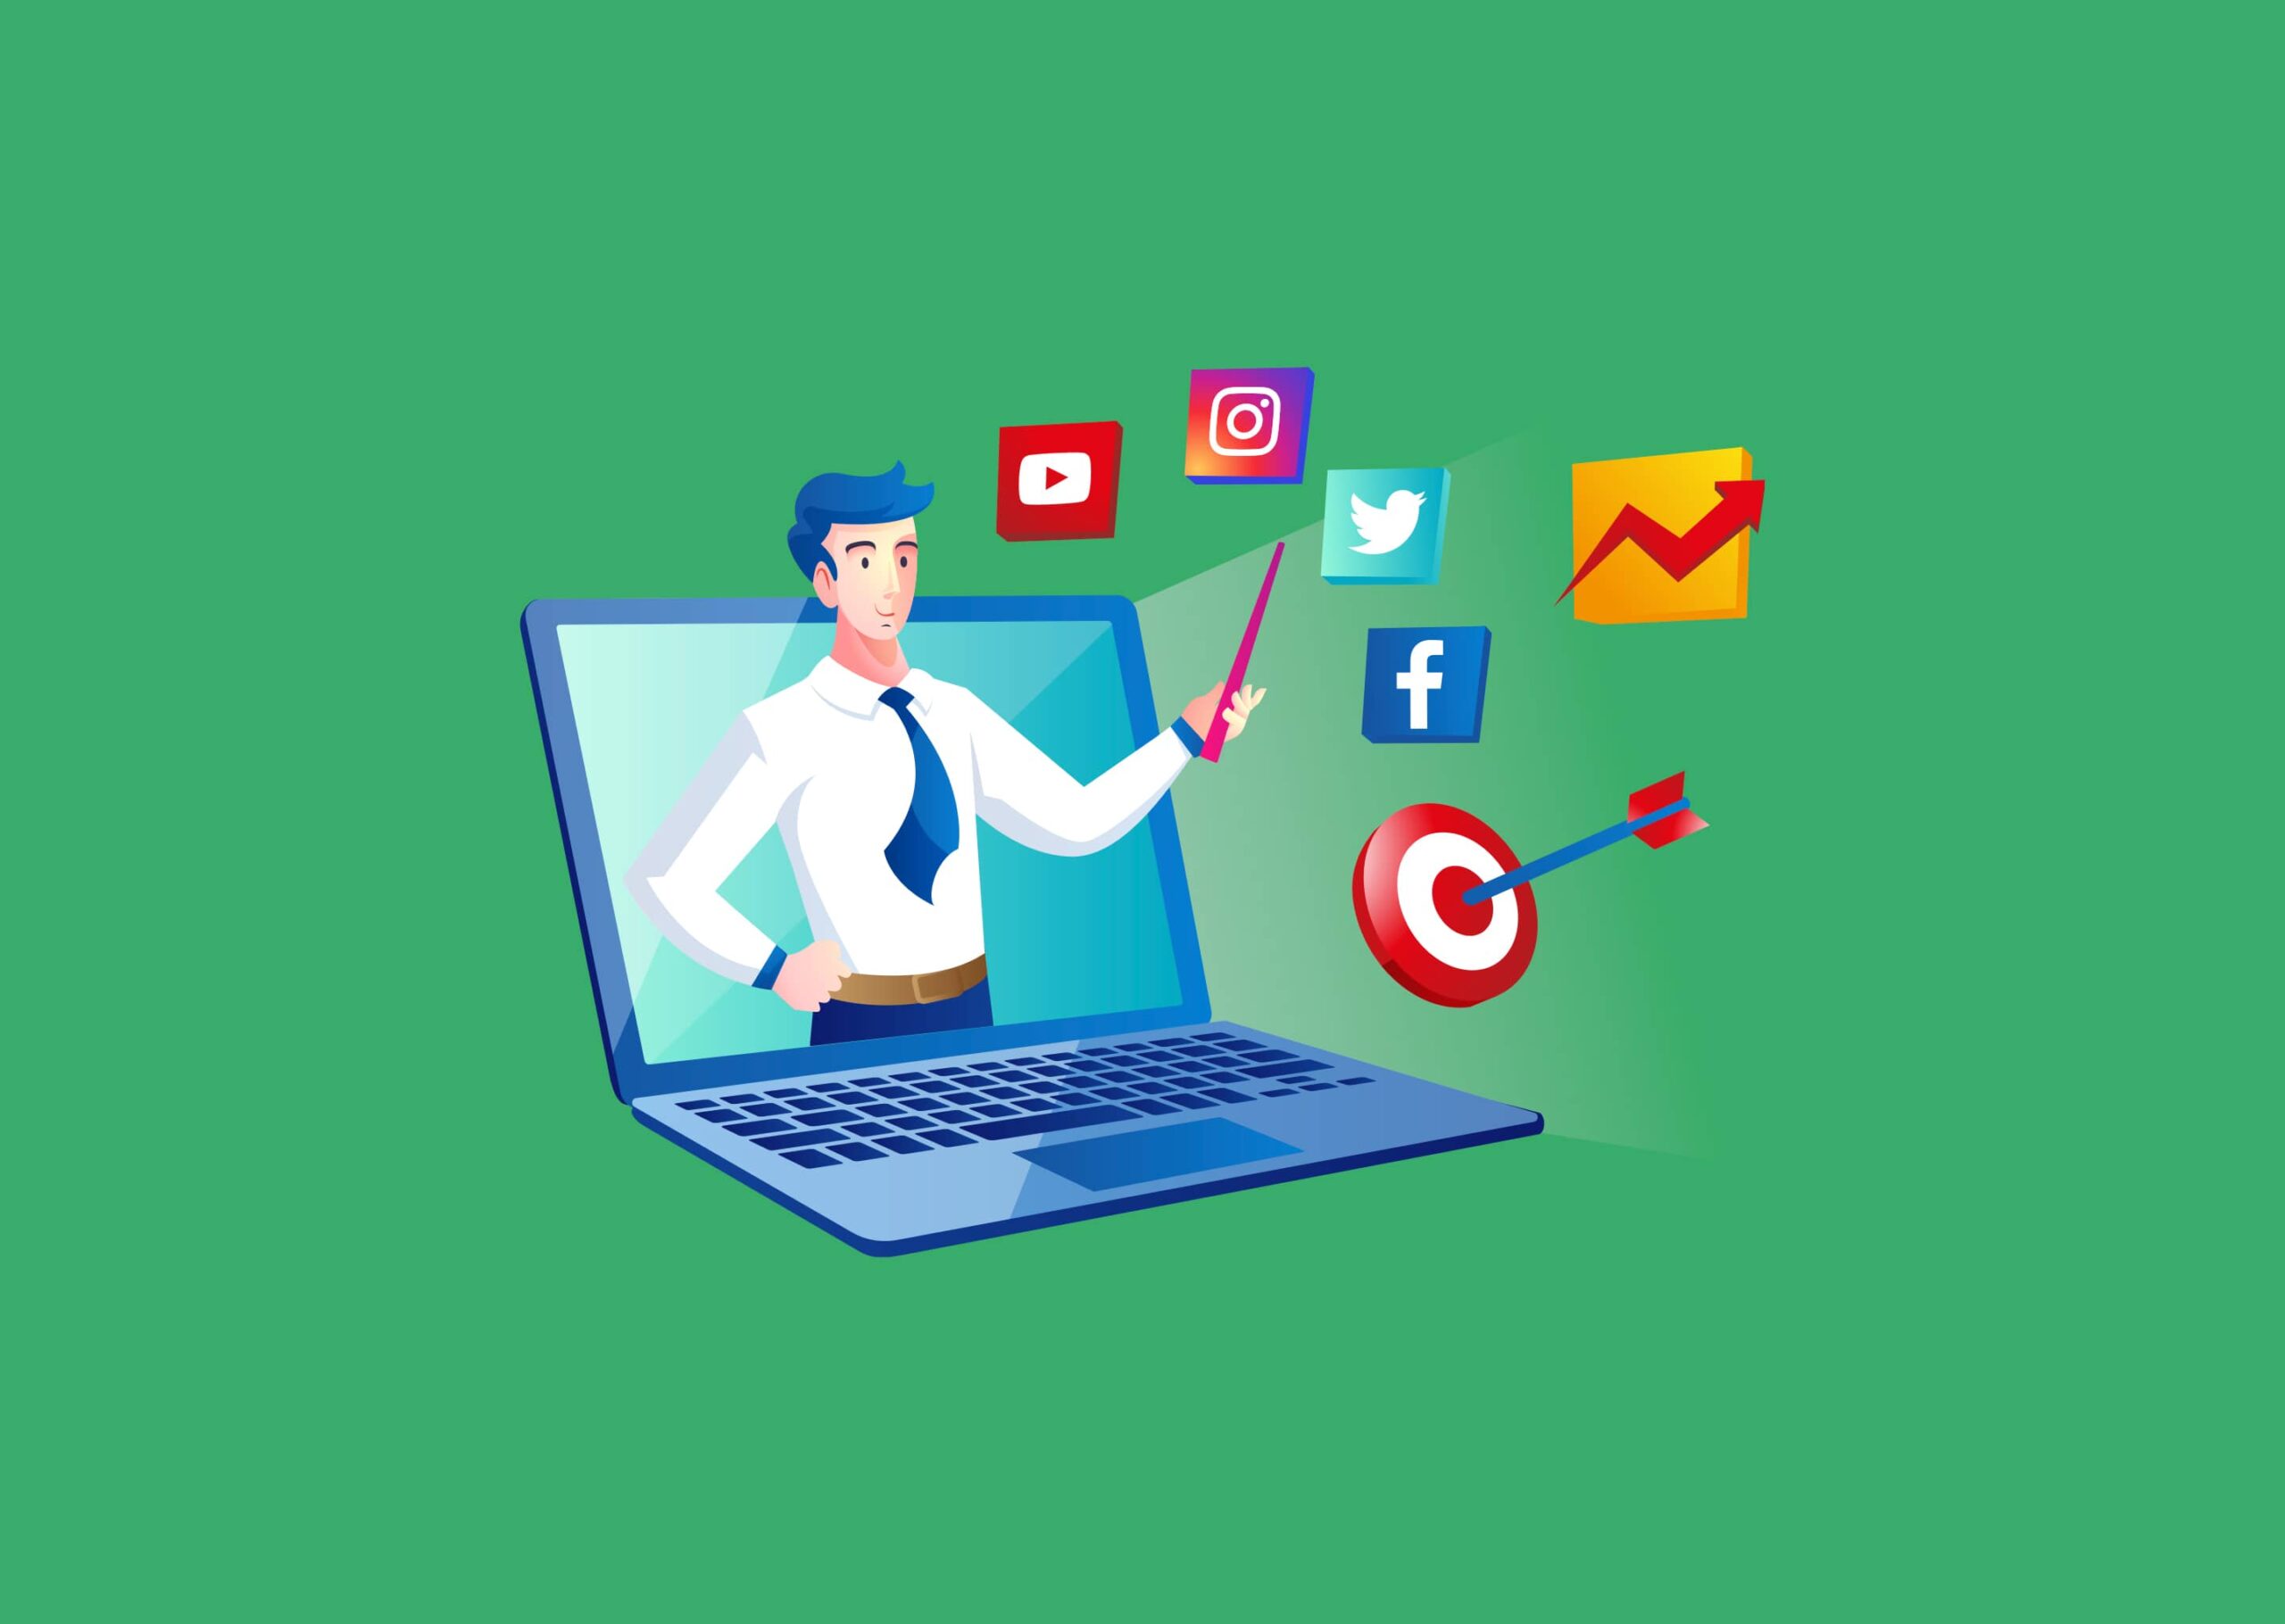 5 effective steps to get your business on social media